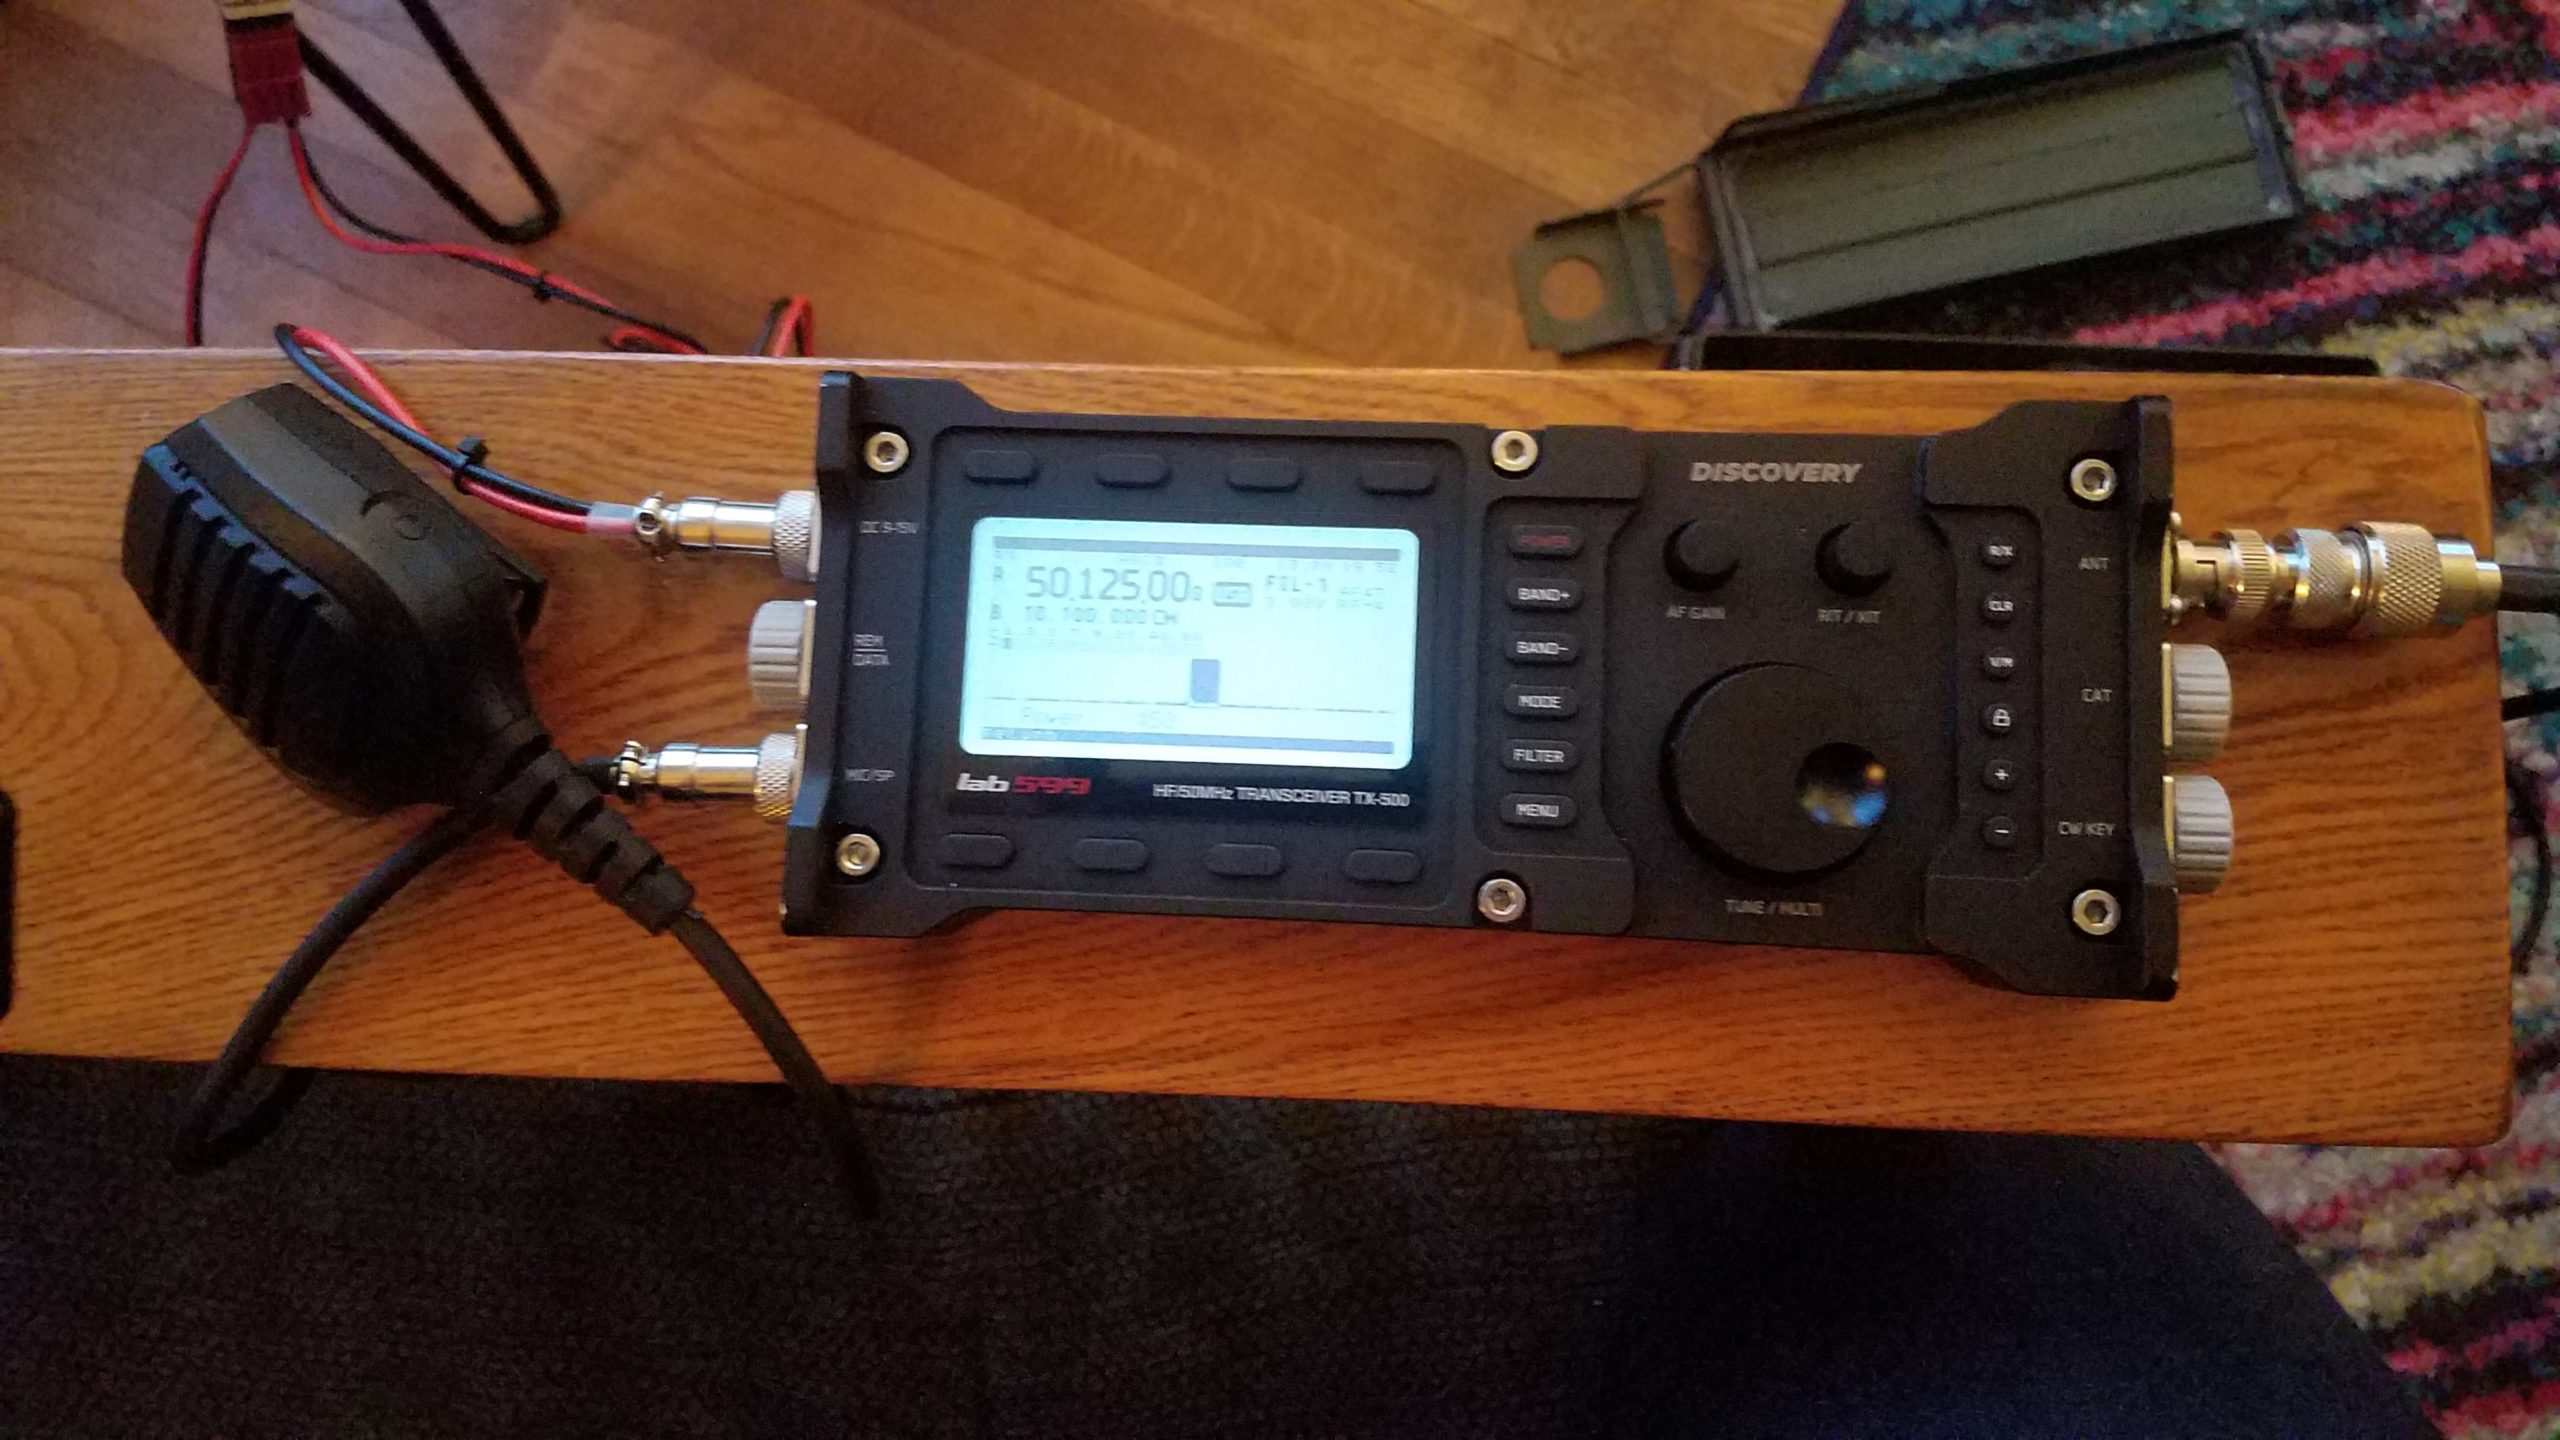 Lab599 TX-500 radio powered up and tuned to 50.125 MHz sitting on a chair arm along a microphone.